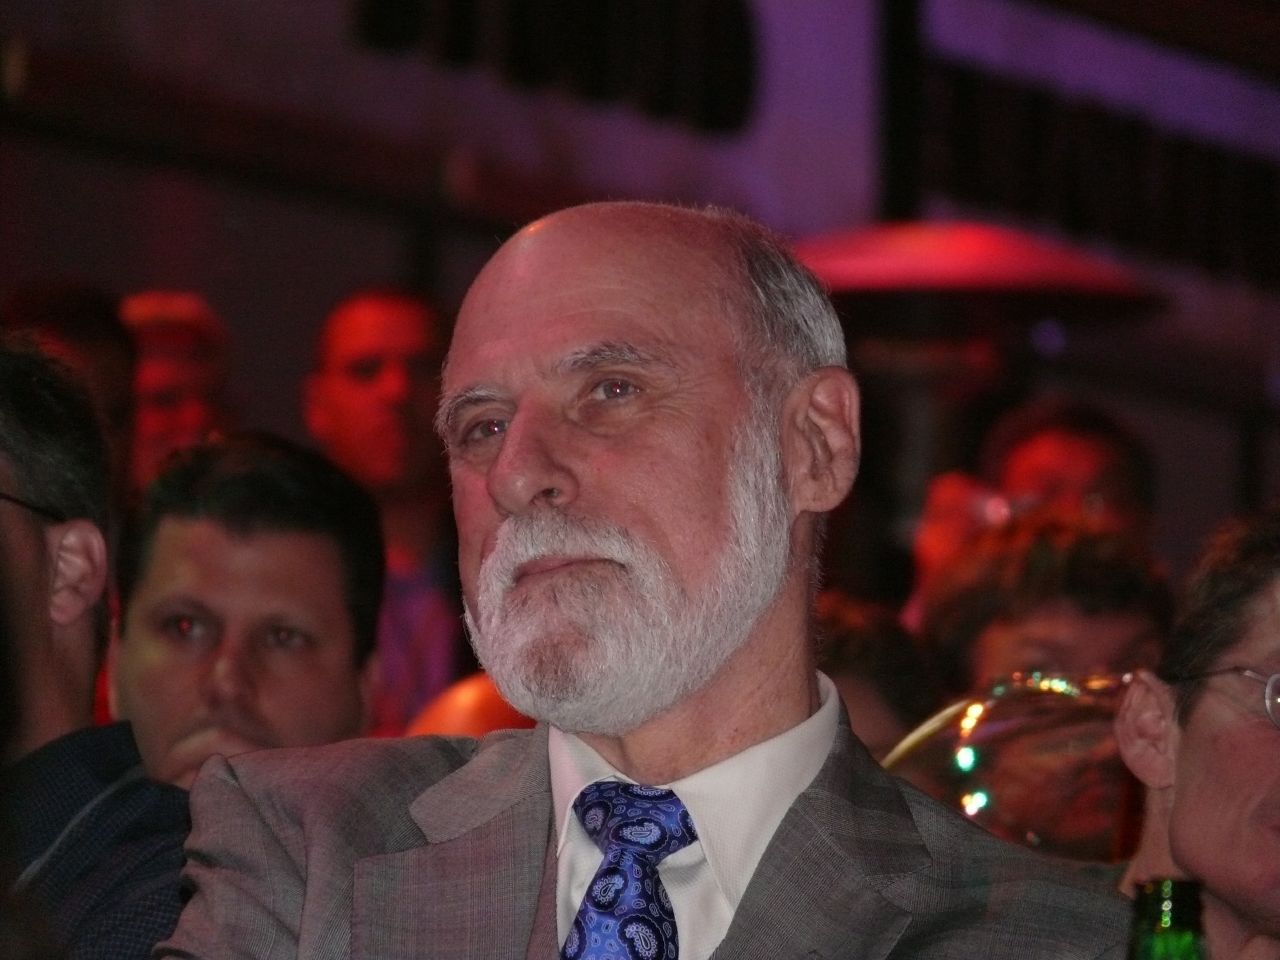 an older man in a suit sitting with people behind him